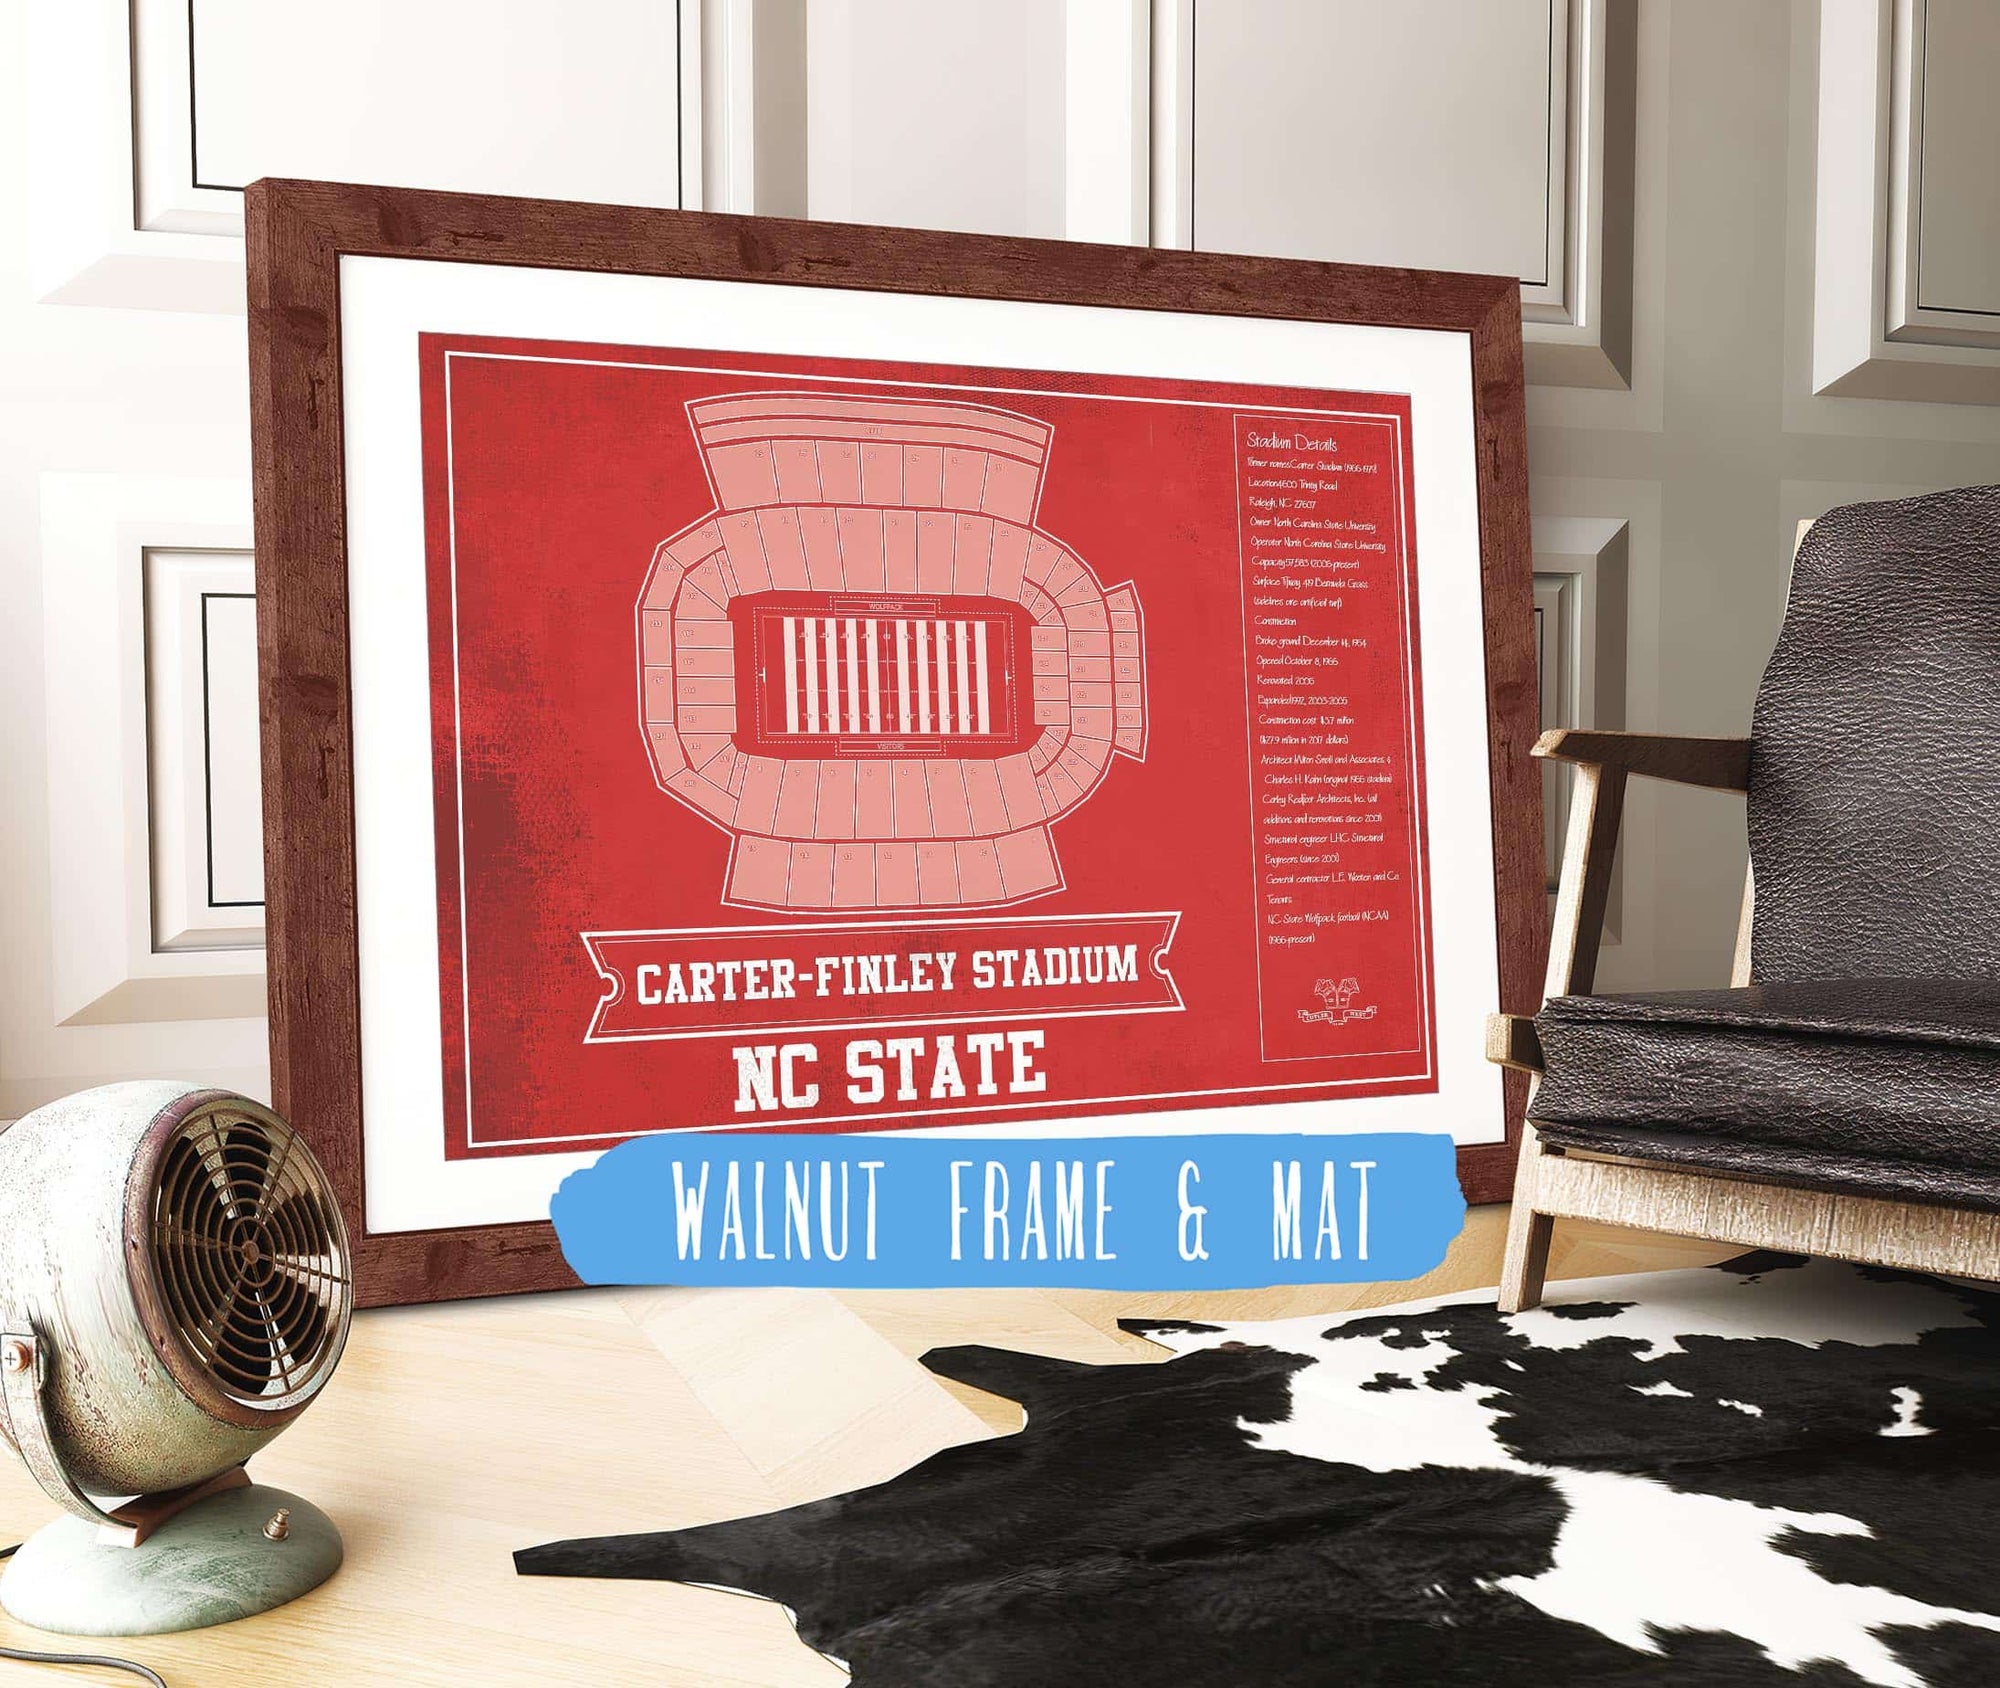 Cutler West NC State Wolfpack Team Colors - Carter-Finley Stadium Vintage Seating Chart